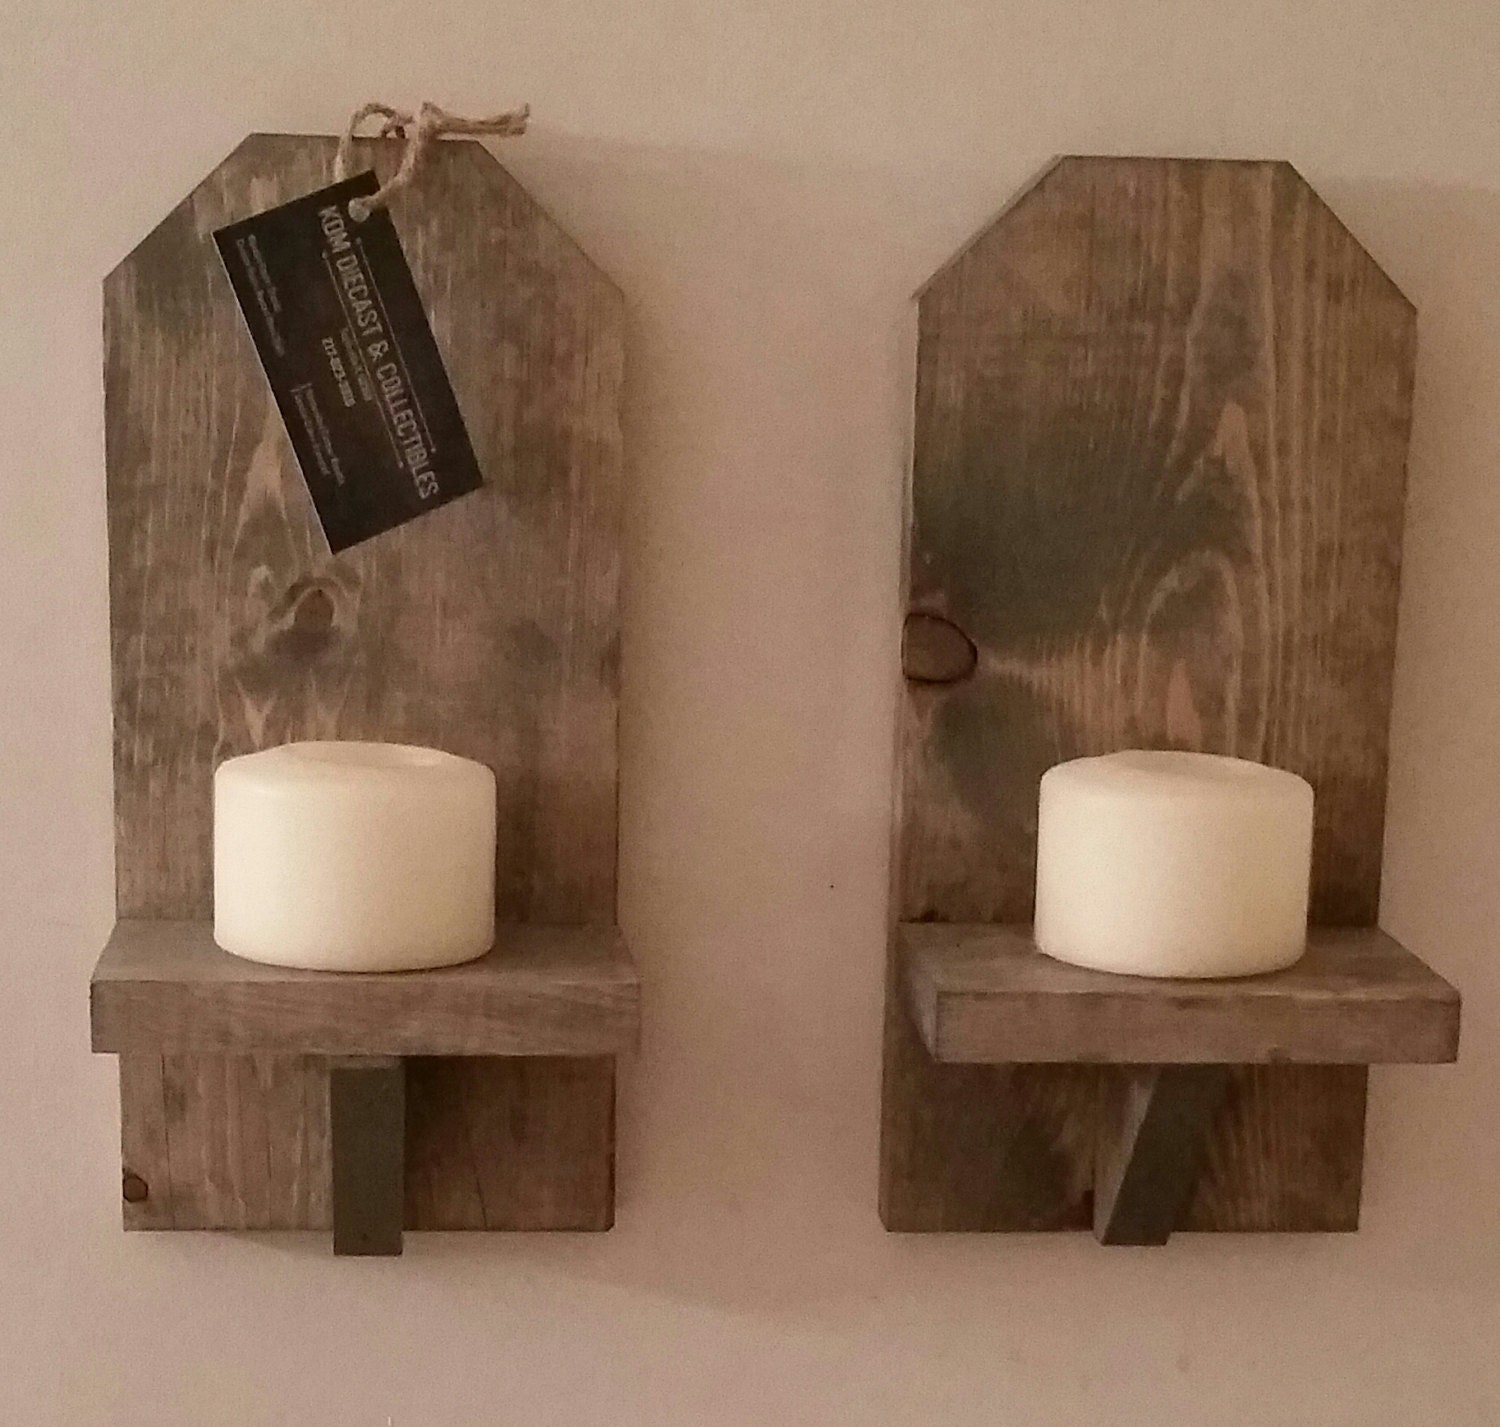 Rustic Wood Wall Sconce (Pair) // 12 Wall Sconce // Shelf ... on Wooden Wall Sconce Shelf Decorating id=36693